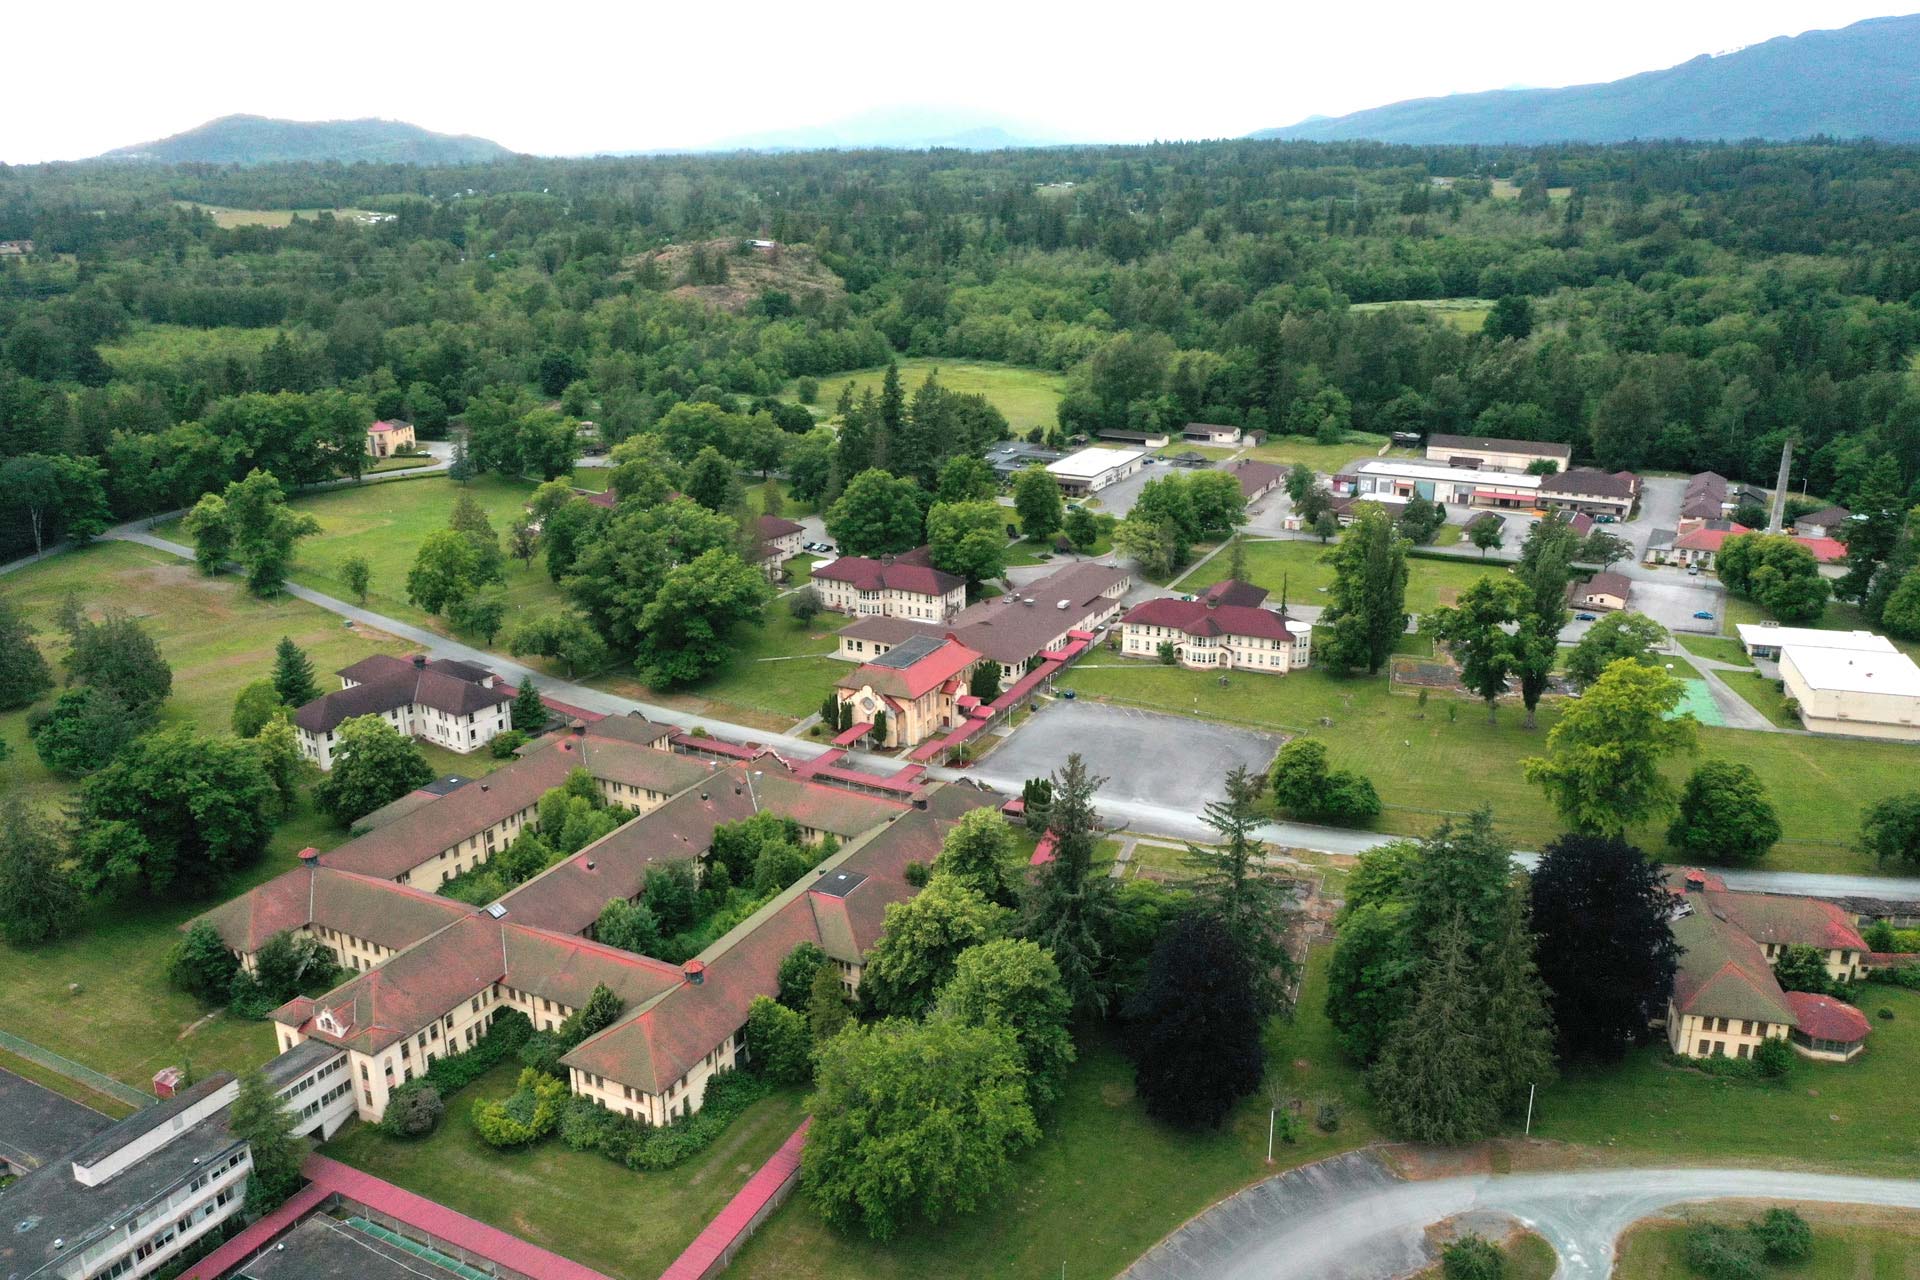 <p>An aerial view of Northern State Hospital, which closed in 1973. The Port of Skagit took ownership of the property in 2018 and has since opened parts of it to the public. (Karen Ducey / The Seattle Times)</p>
